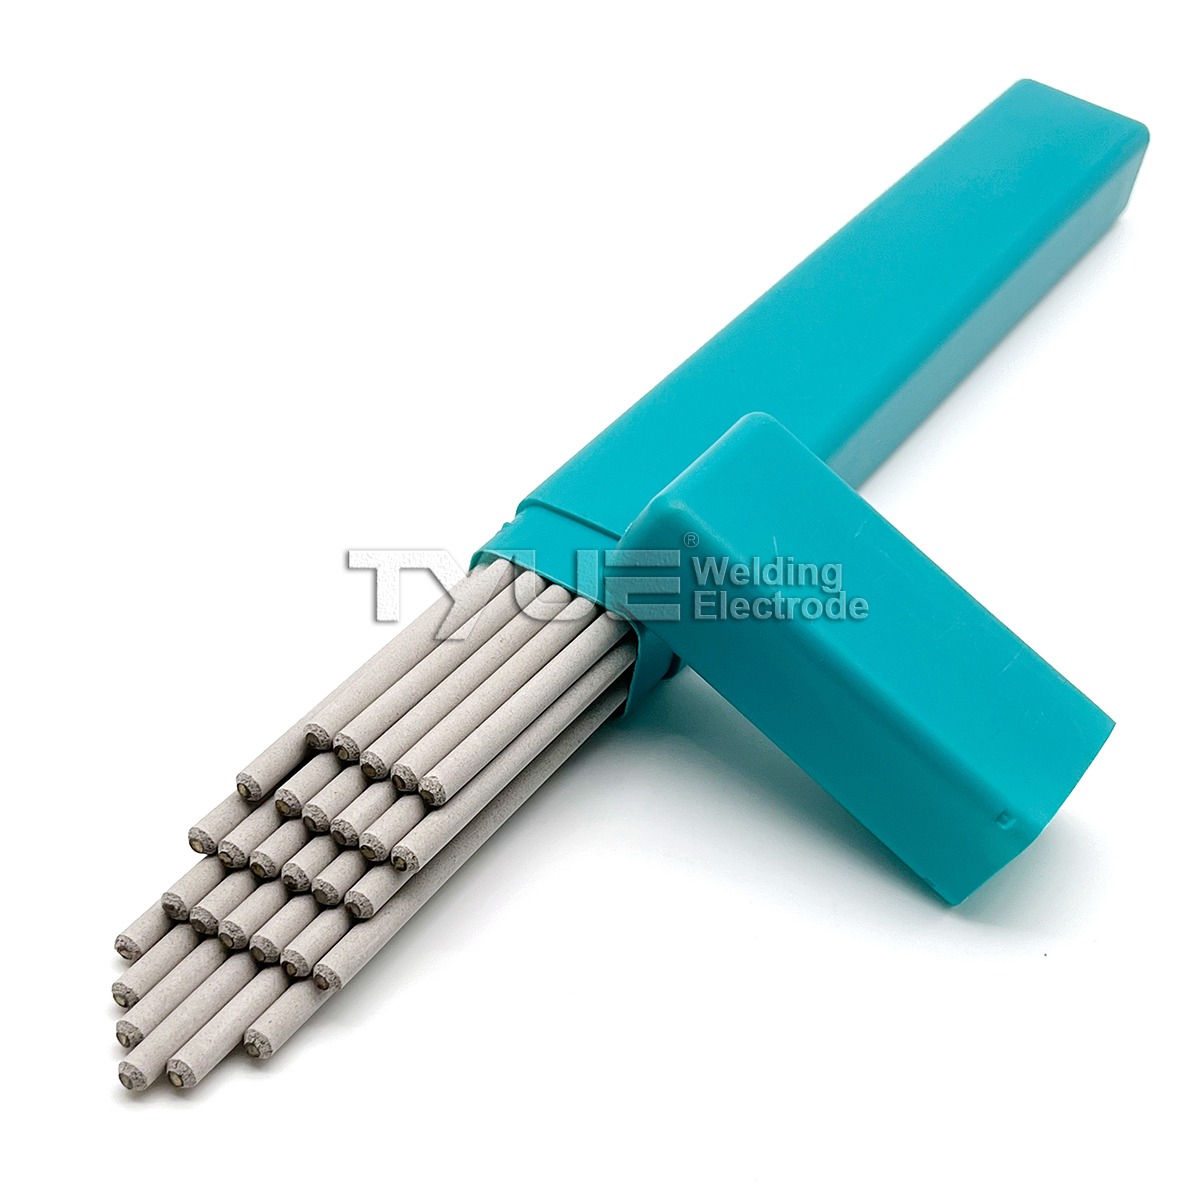 AWS A5.4 E309Mo-15 Stainless Steel Electrode with Low Hydrogen Sodium Coating, Welding Rods